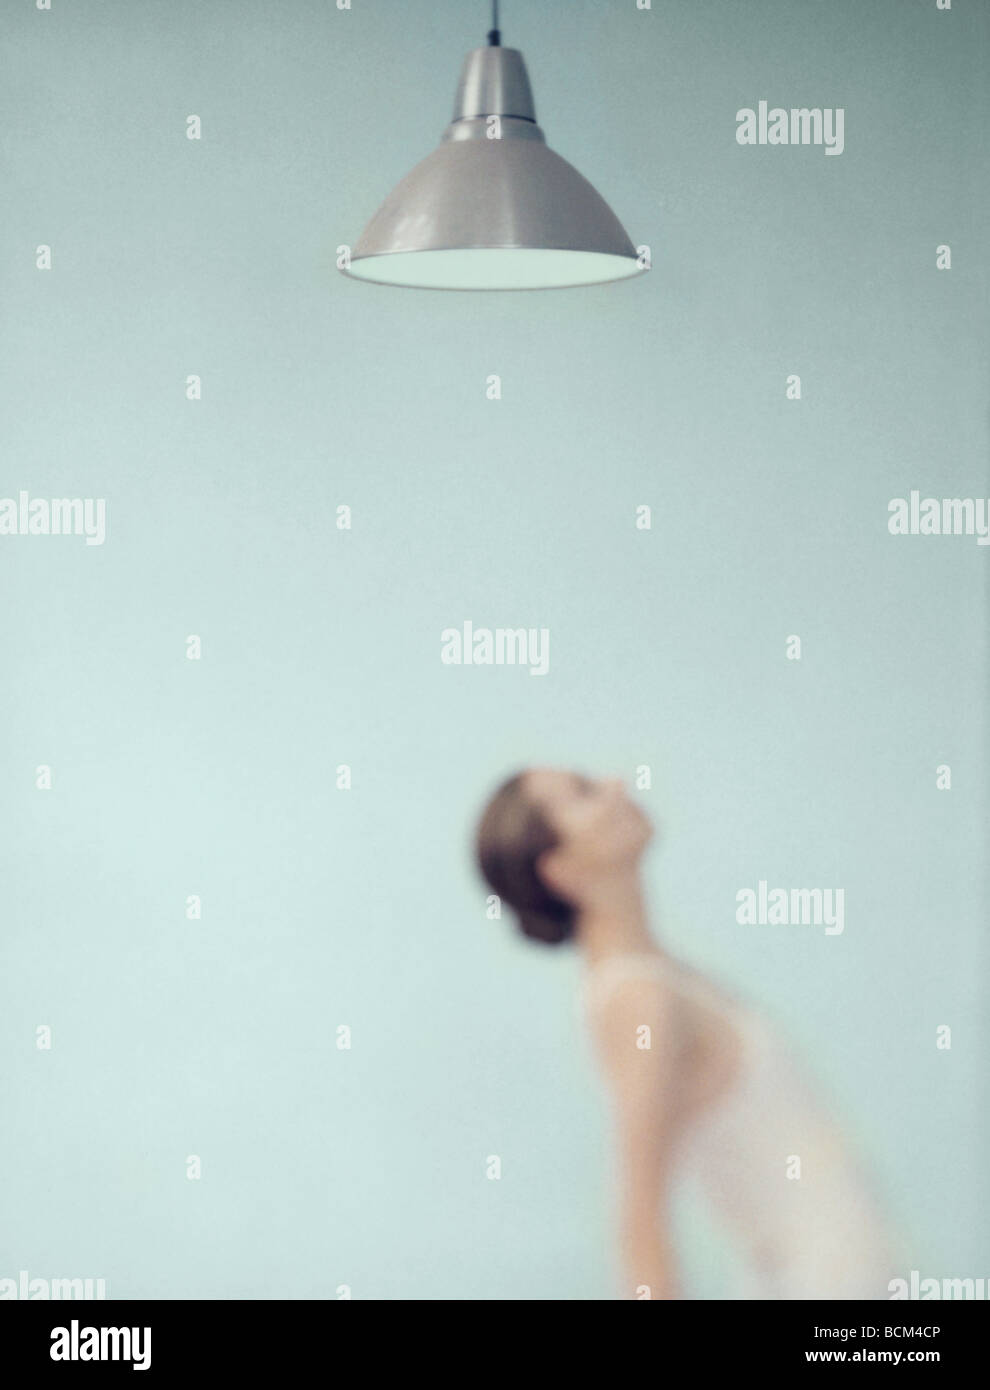 Young woman bending over backwards under ceiling lamp, focus on lamp in foreground Stock Photo